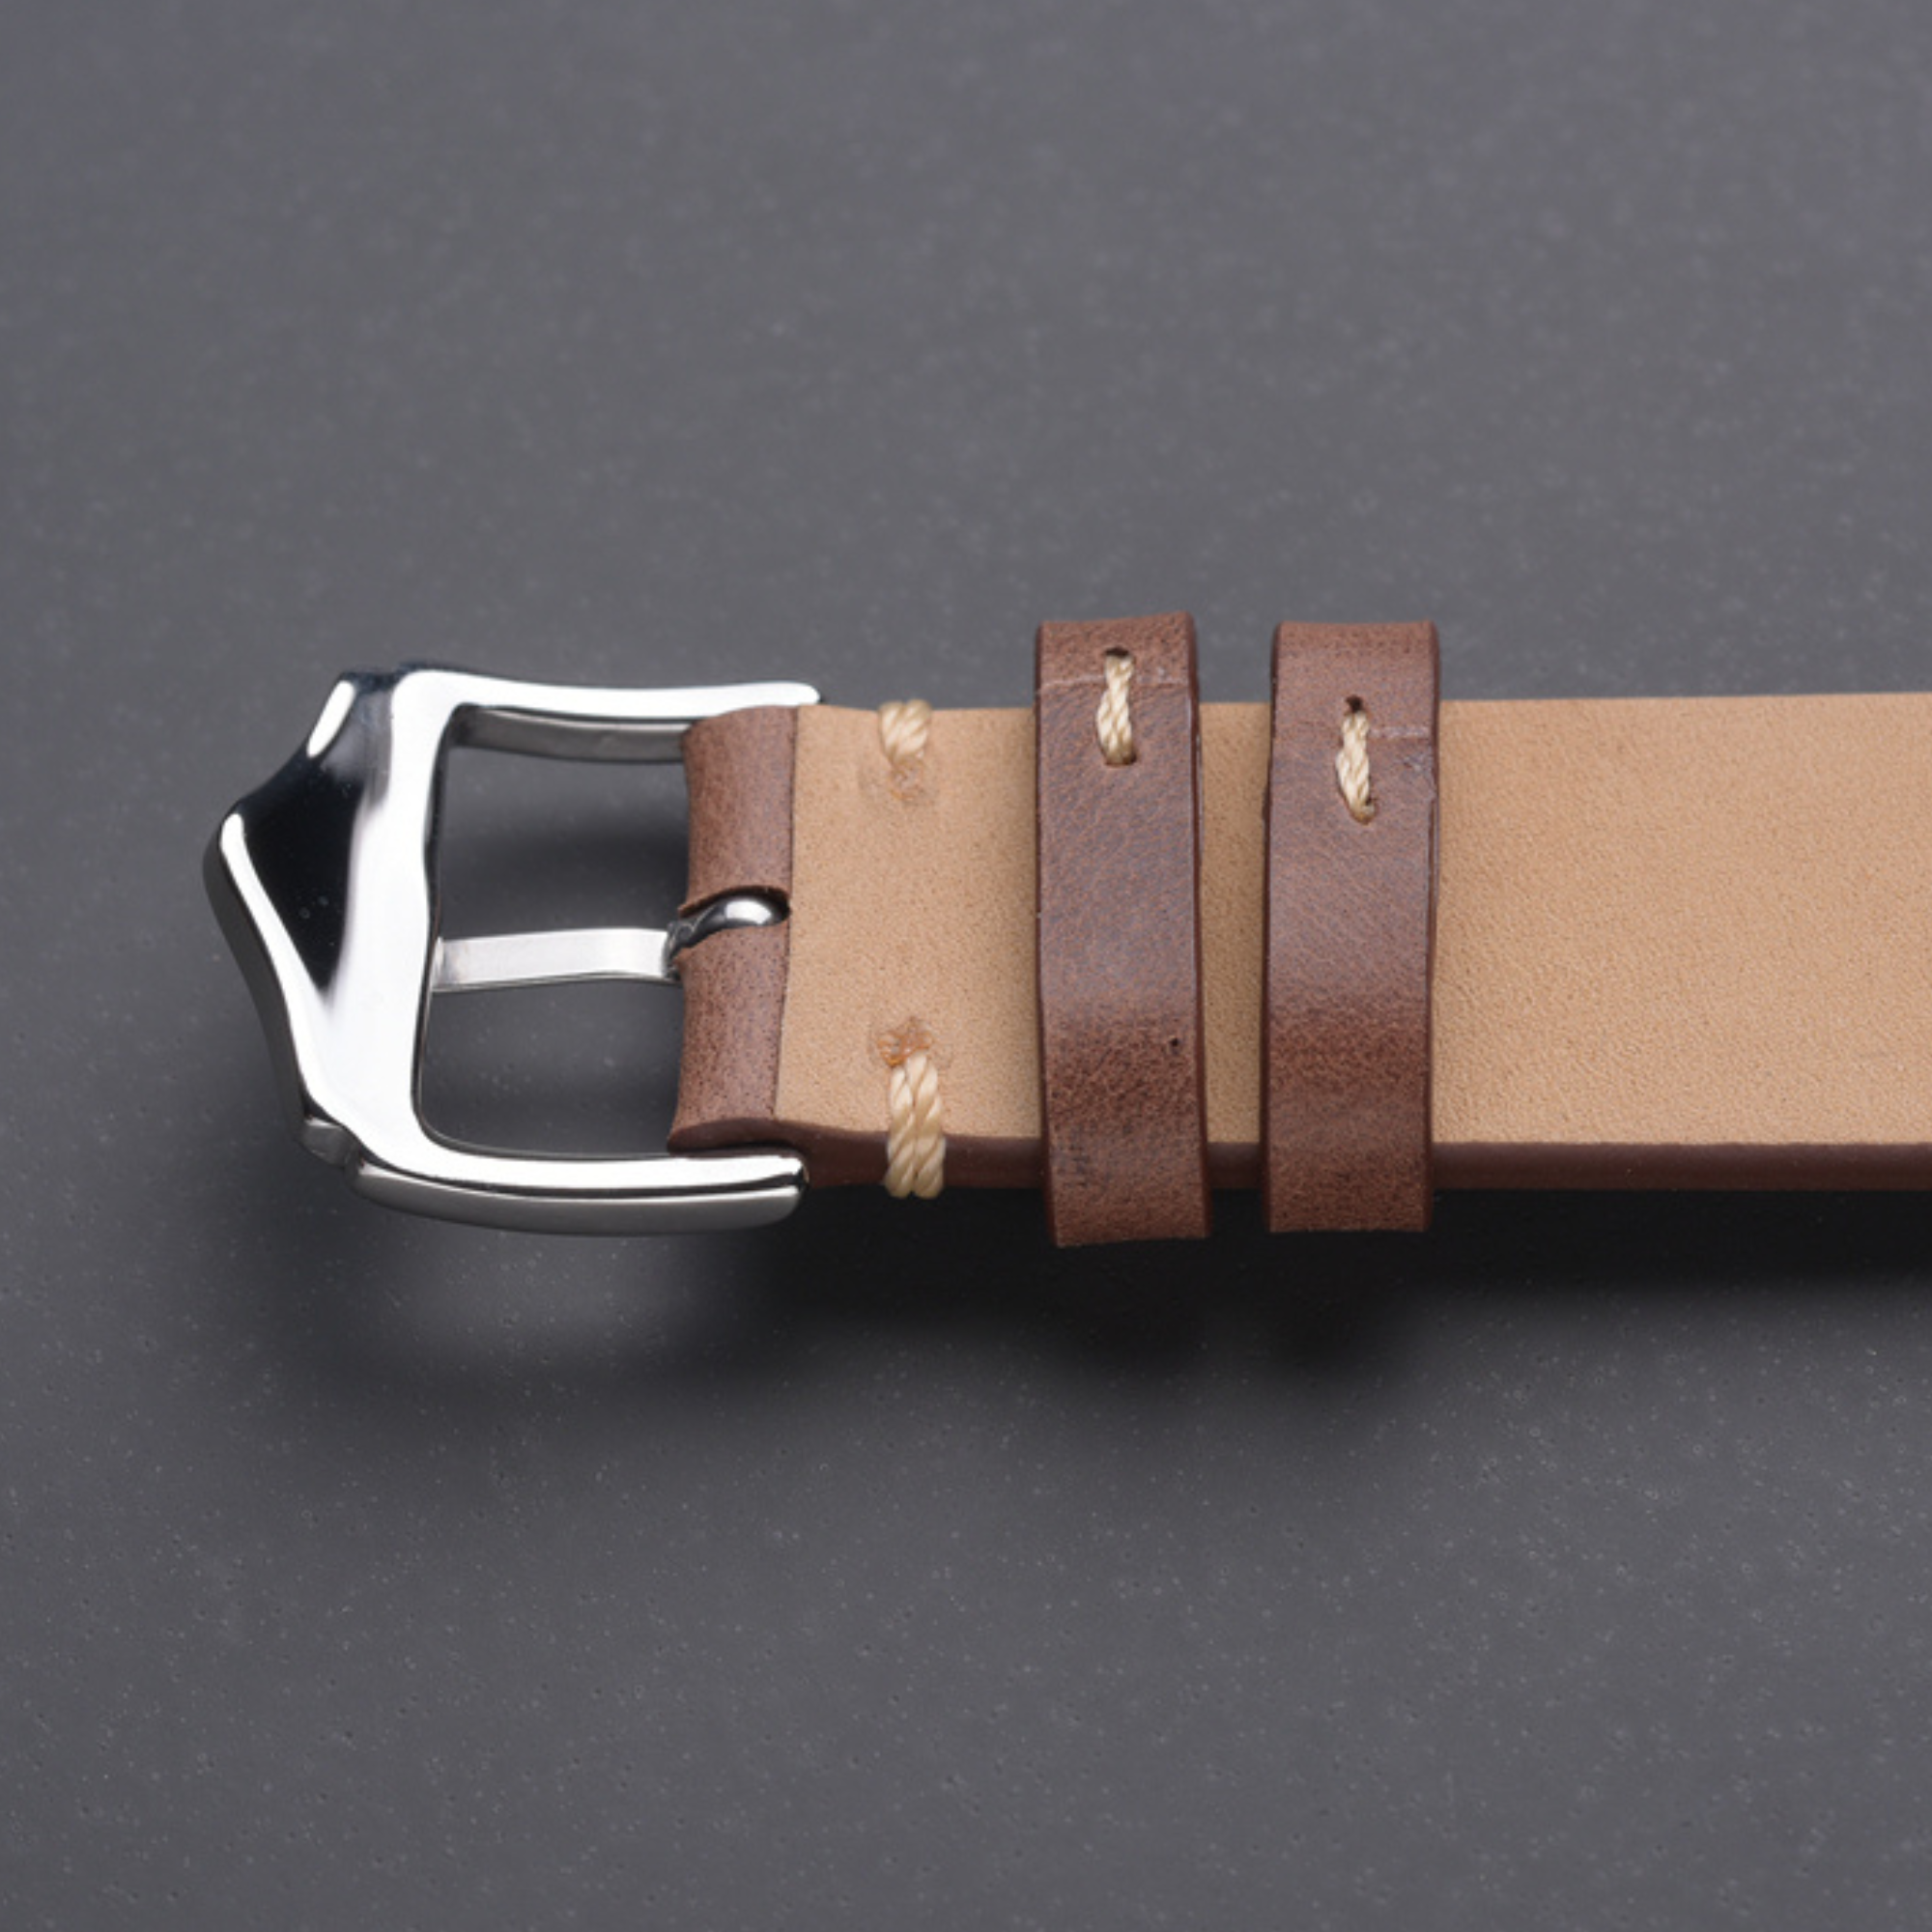 Genuine Leather Watch Strap Watchband Accessories 20mm - Coffee watch leather strap band india online dream watches